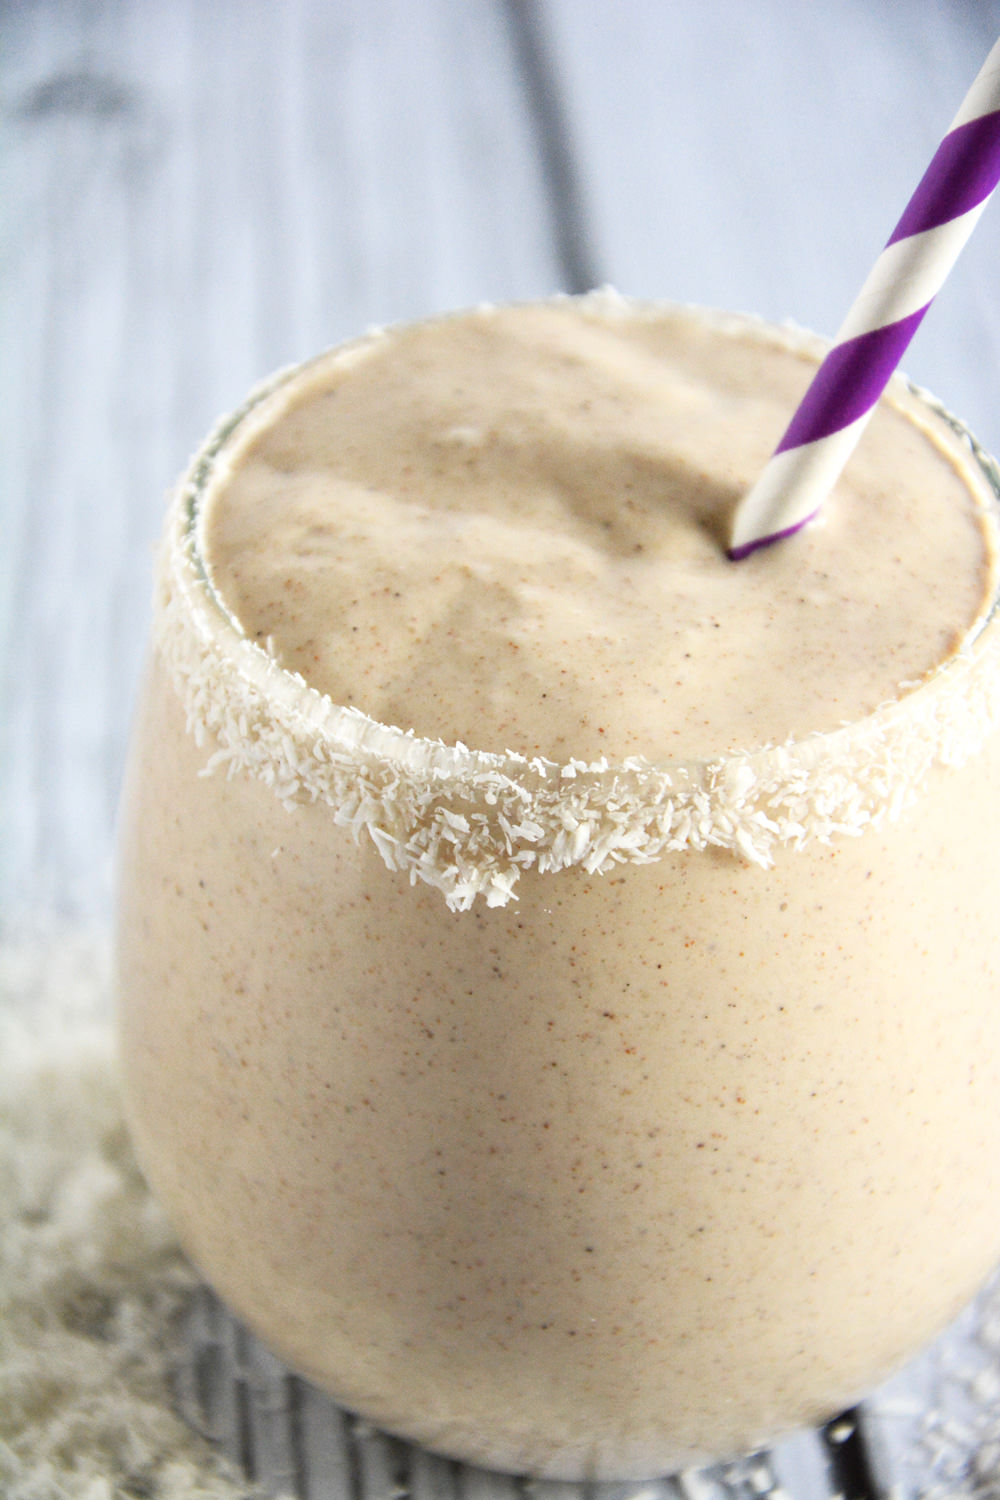 Coconut, Vanilla & Almond Butter Smoothie | The Housewife in Training Files